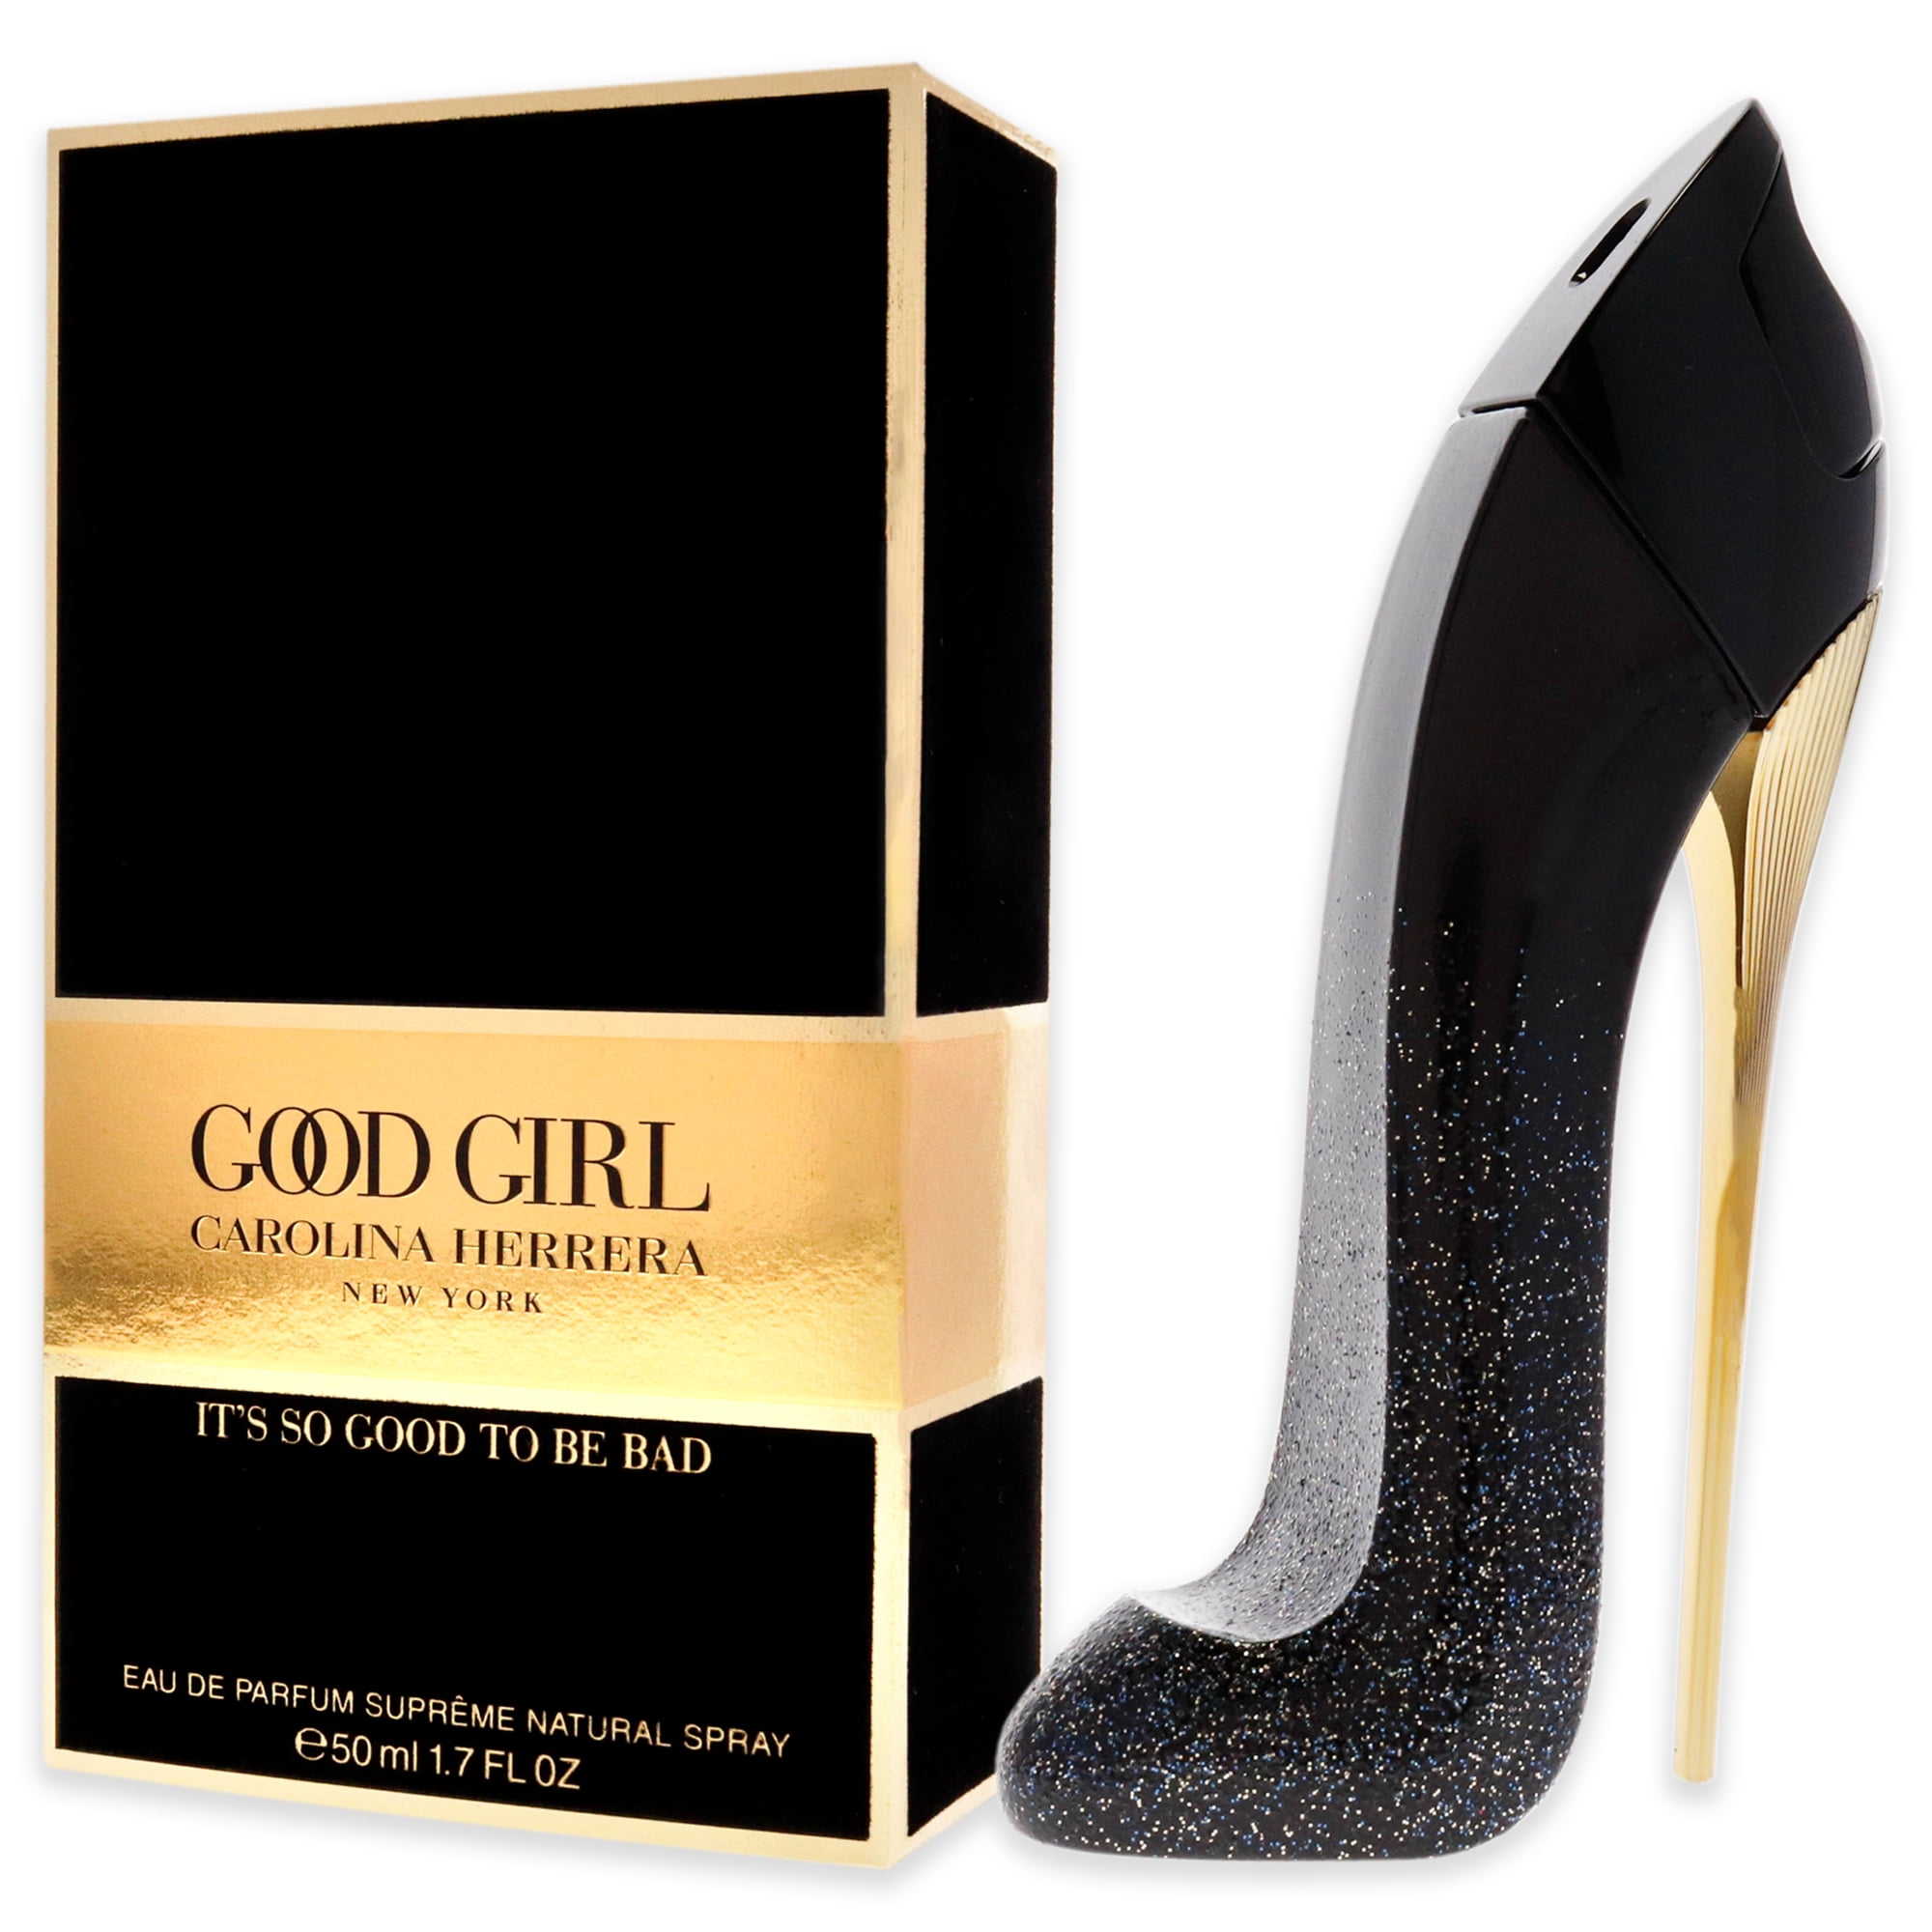 Shop for samples of Good Girl Supreme (Eau de Parfum) by Carolina Herrera  for women rebottled and repacked by